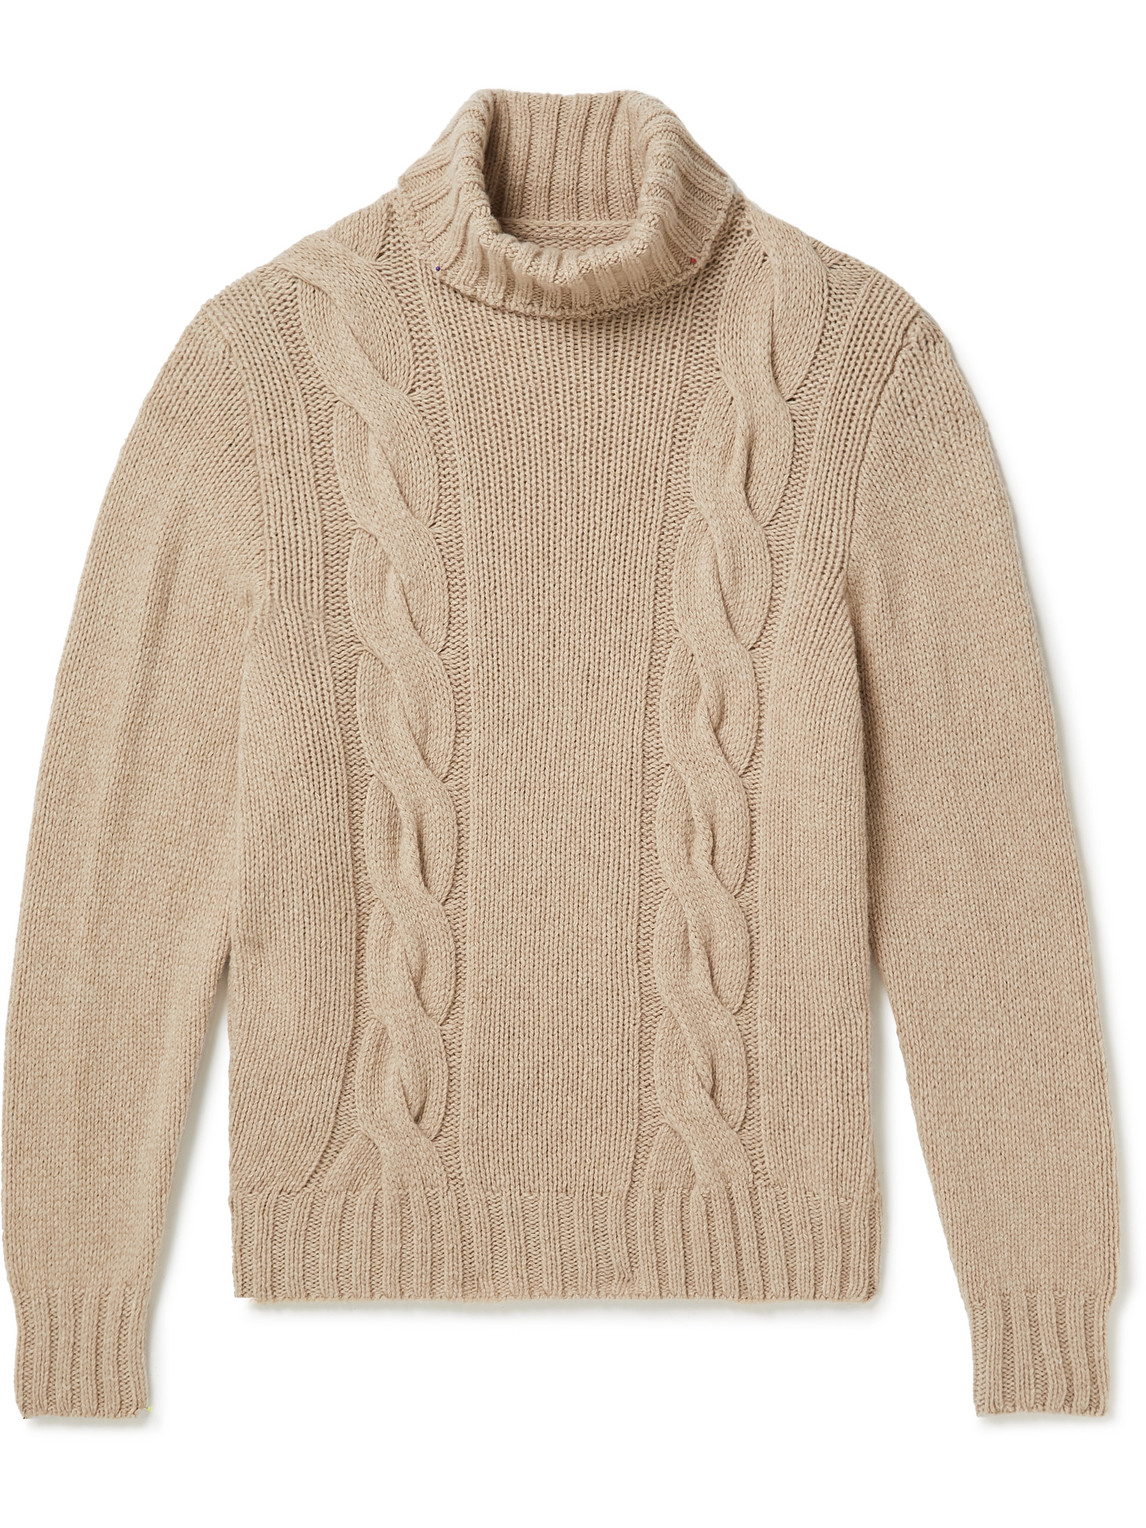 Anderson & Sheppard Cable-knit Merino Wool Rollneck Sweater In Neutrals